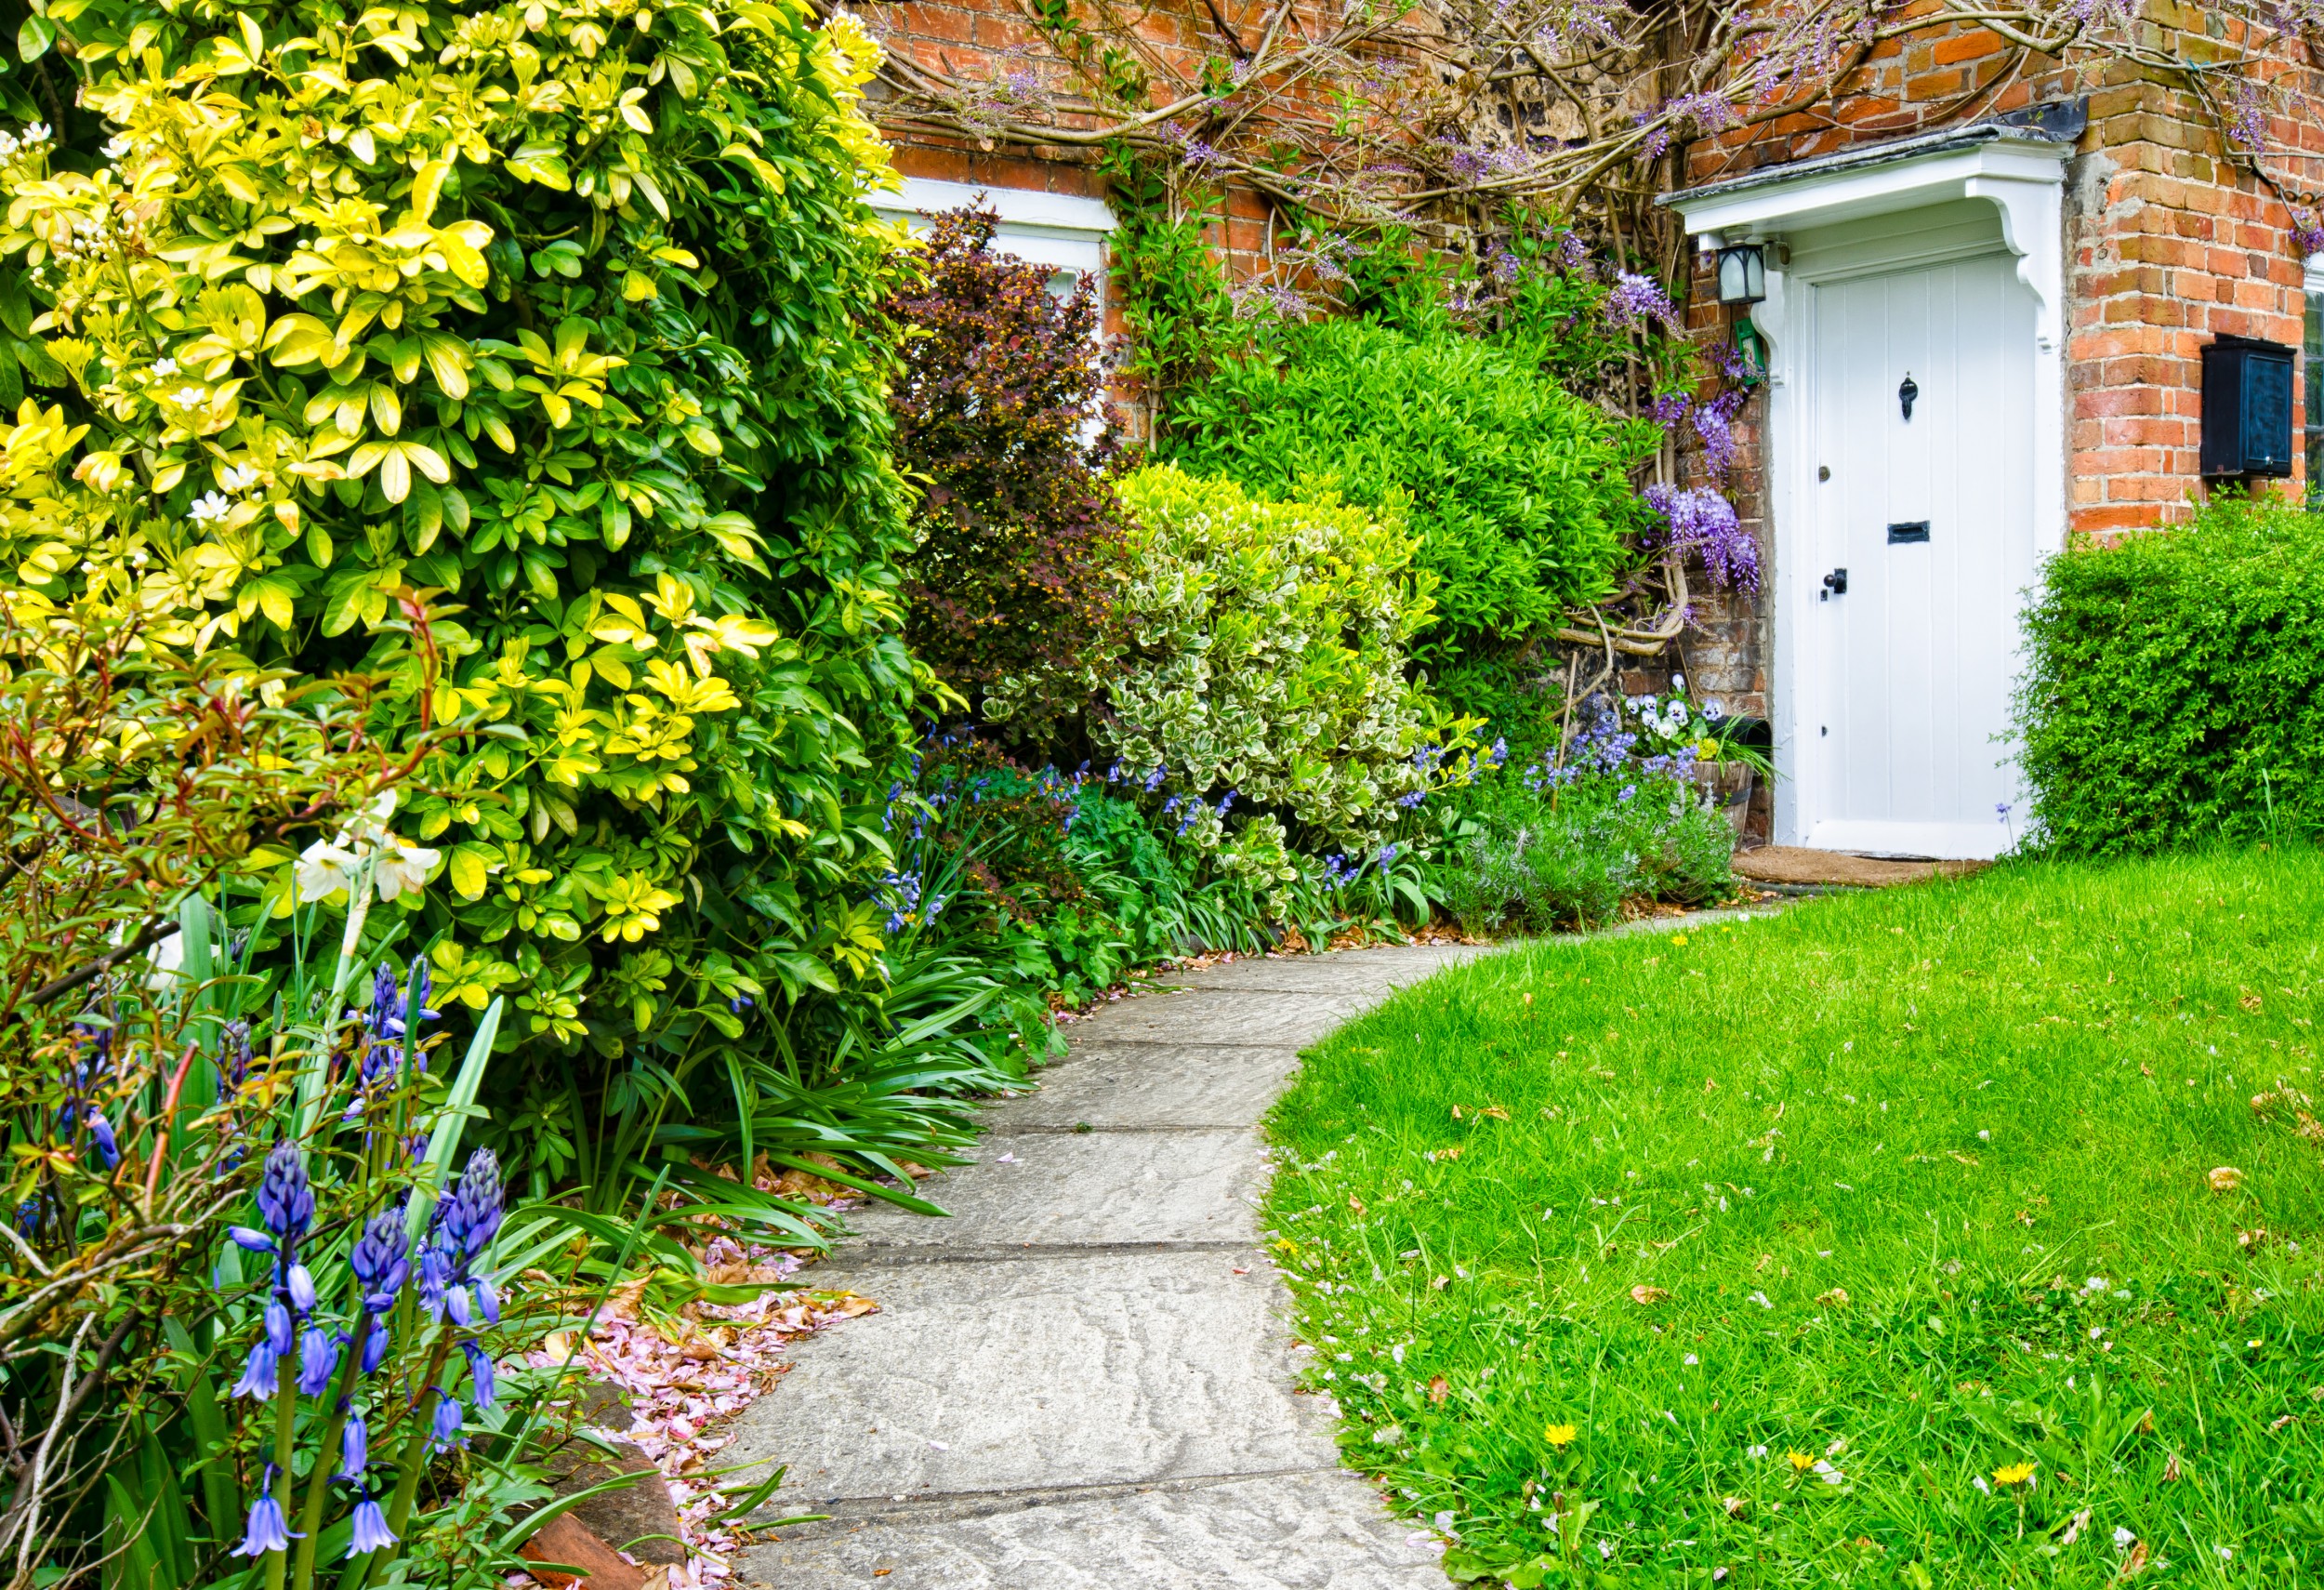 How important is a garden to potential buyers and tenants?